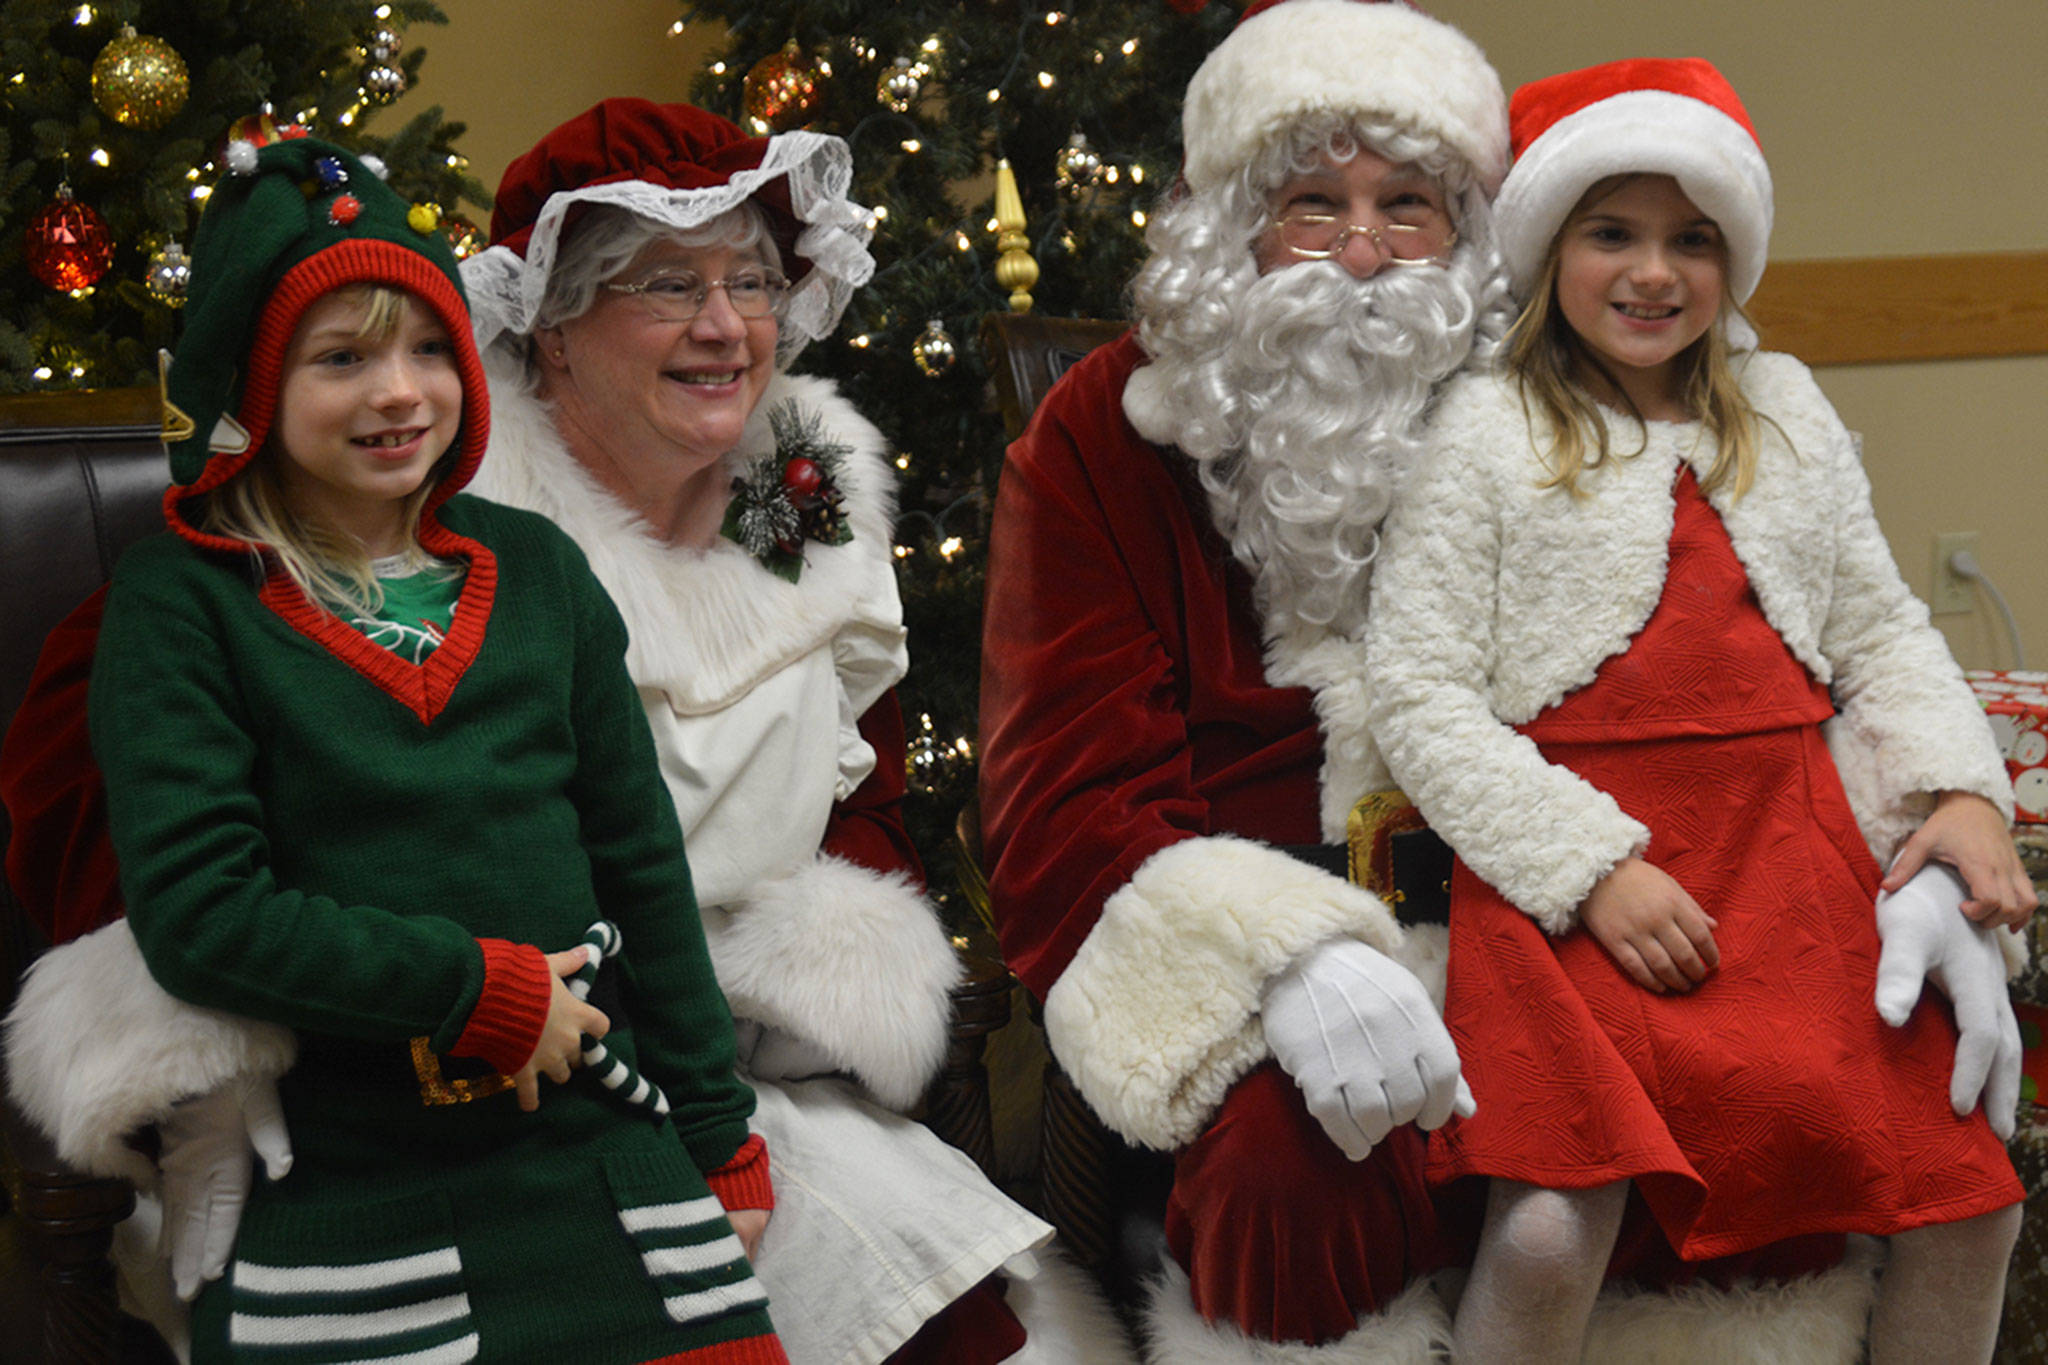 10,000 turn out for Merrysville for the Holidays (slide show)